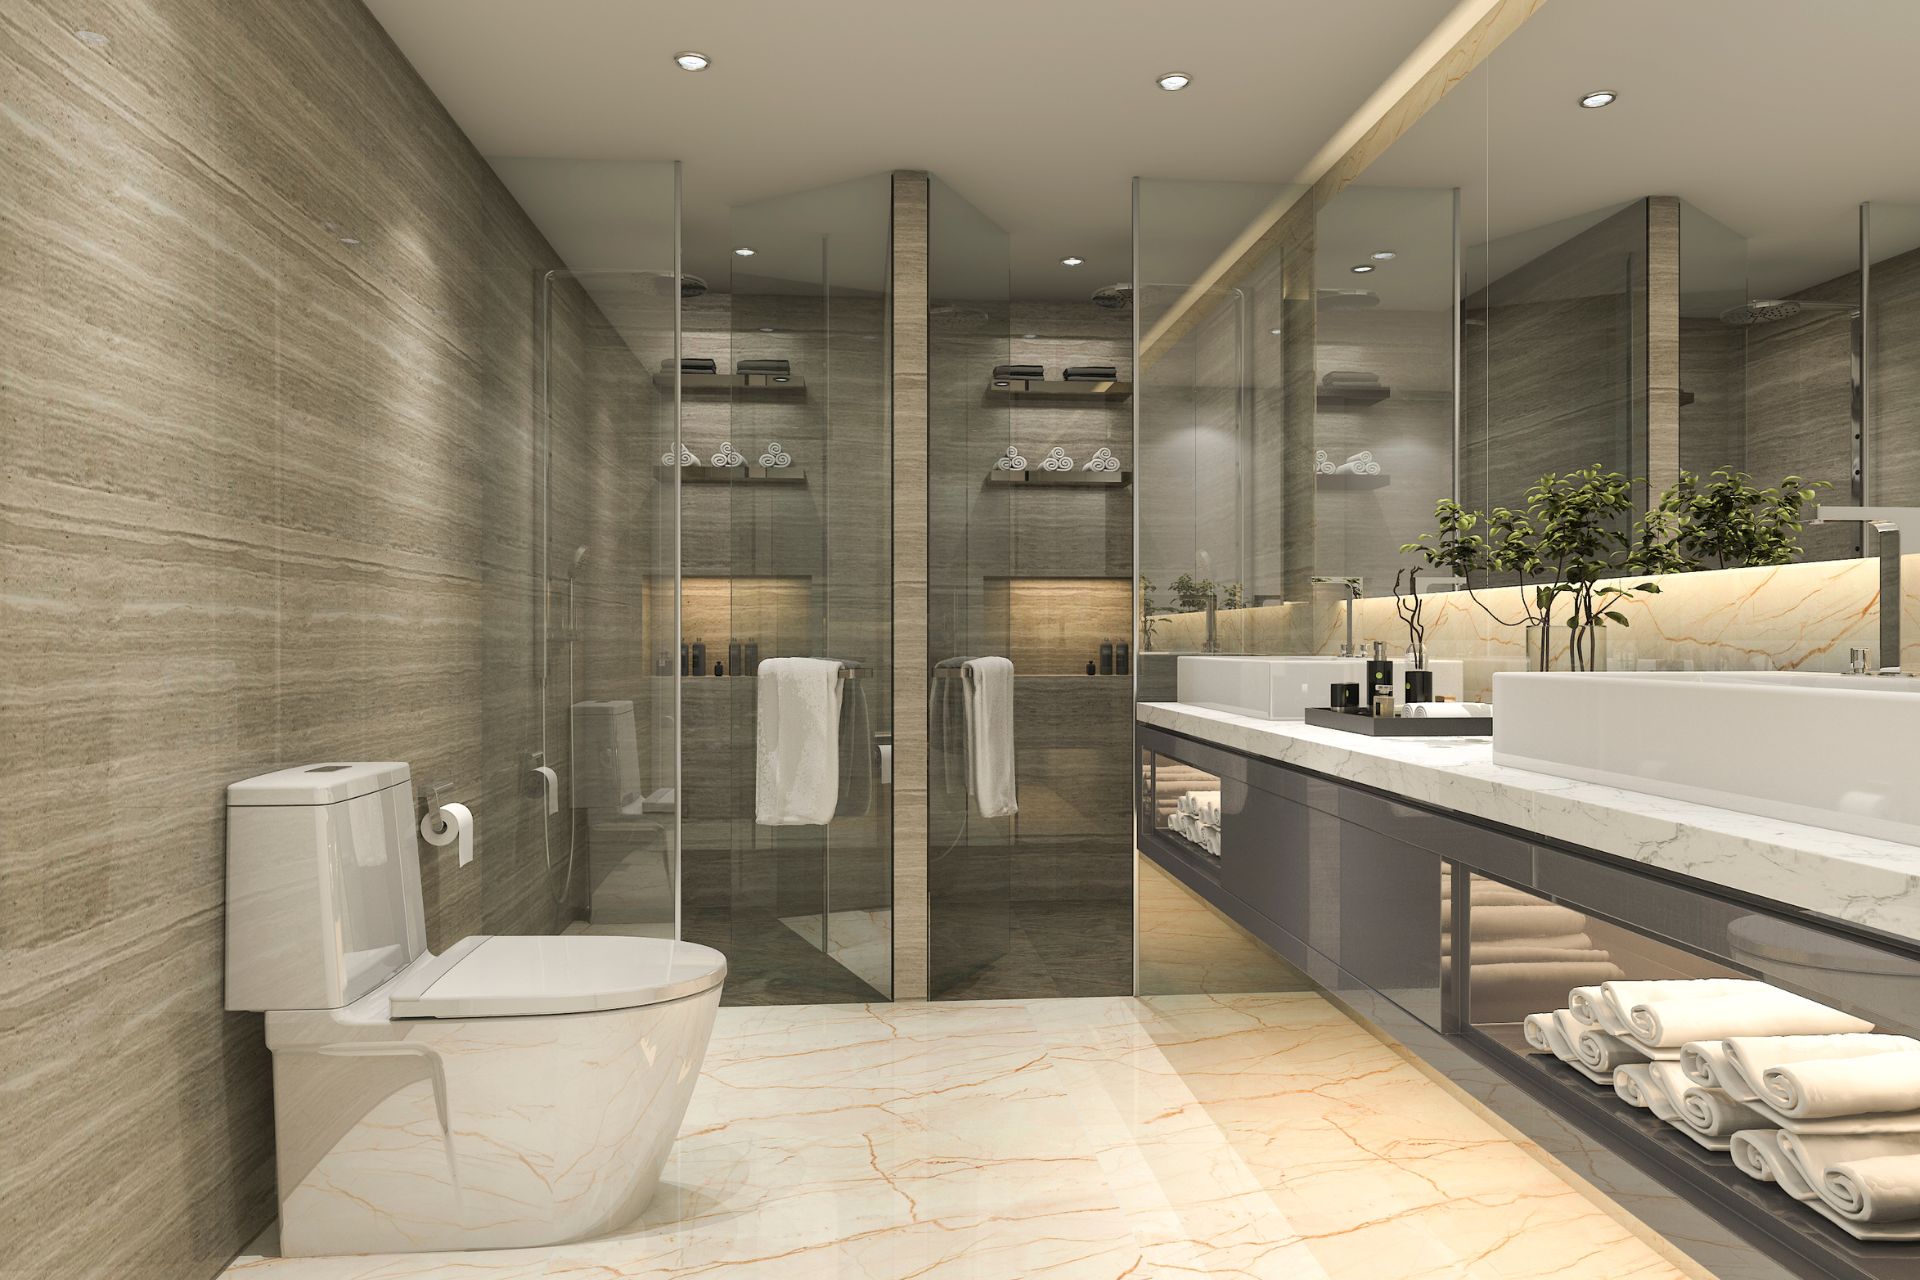 Luxury bathroom style with toilet, floating vanity, and shower room